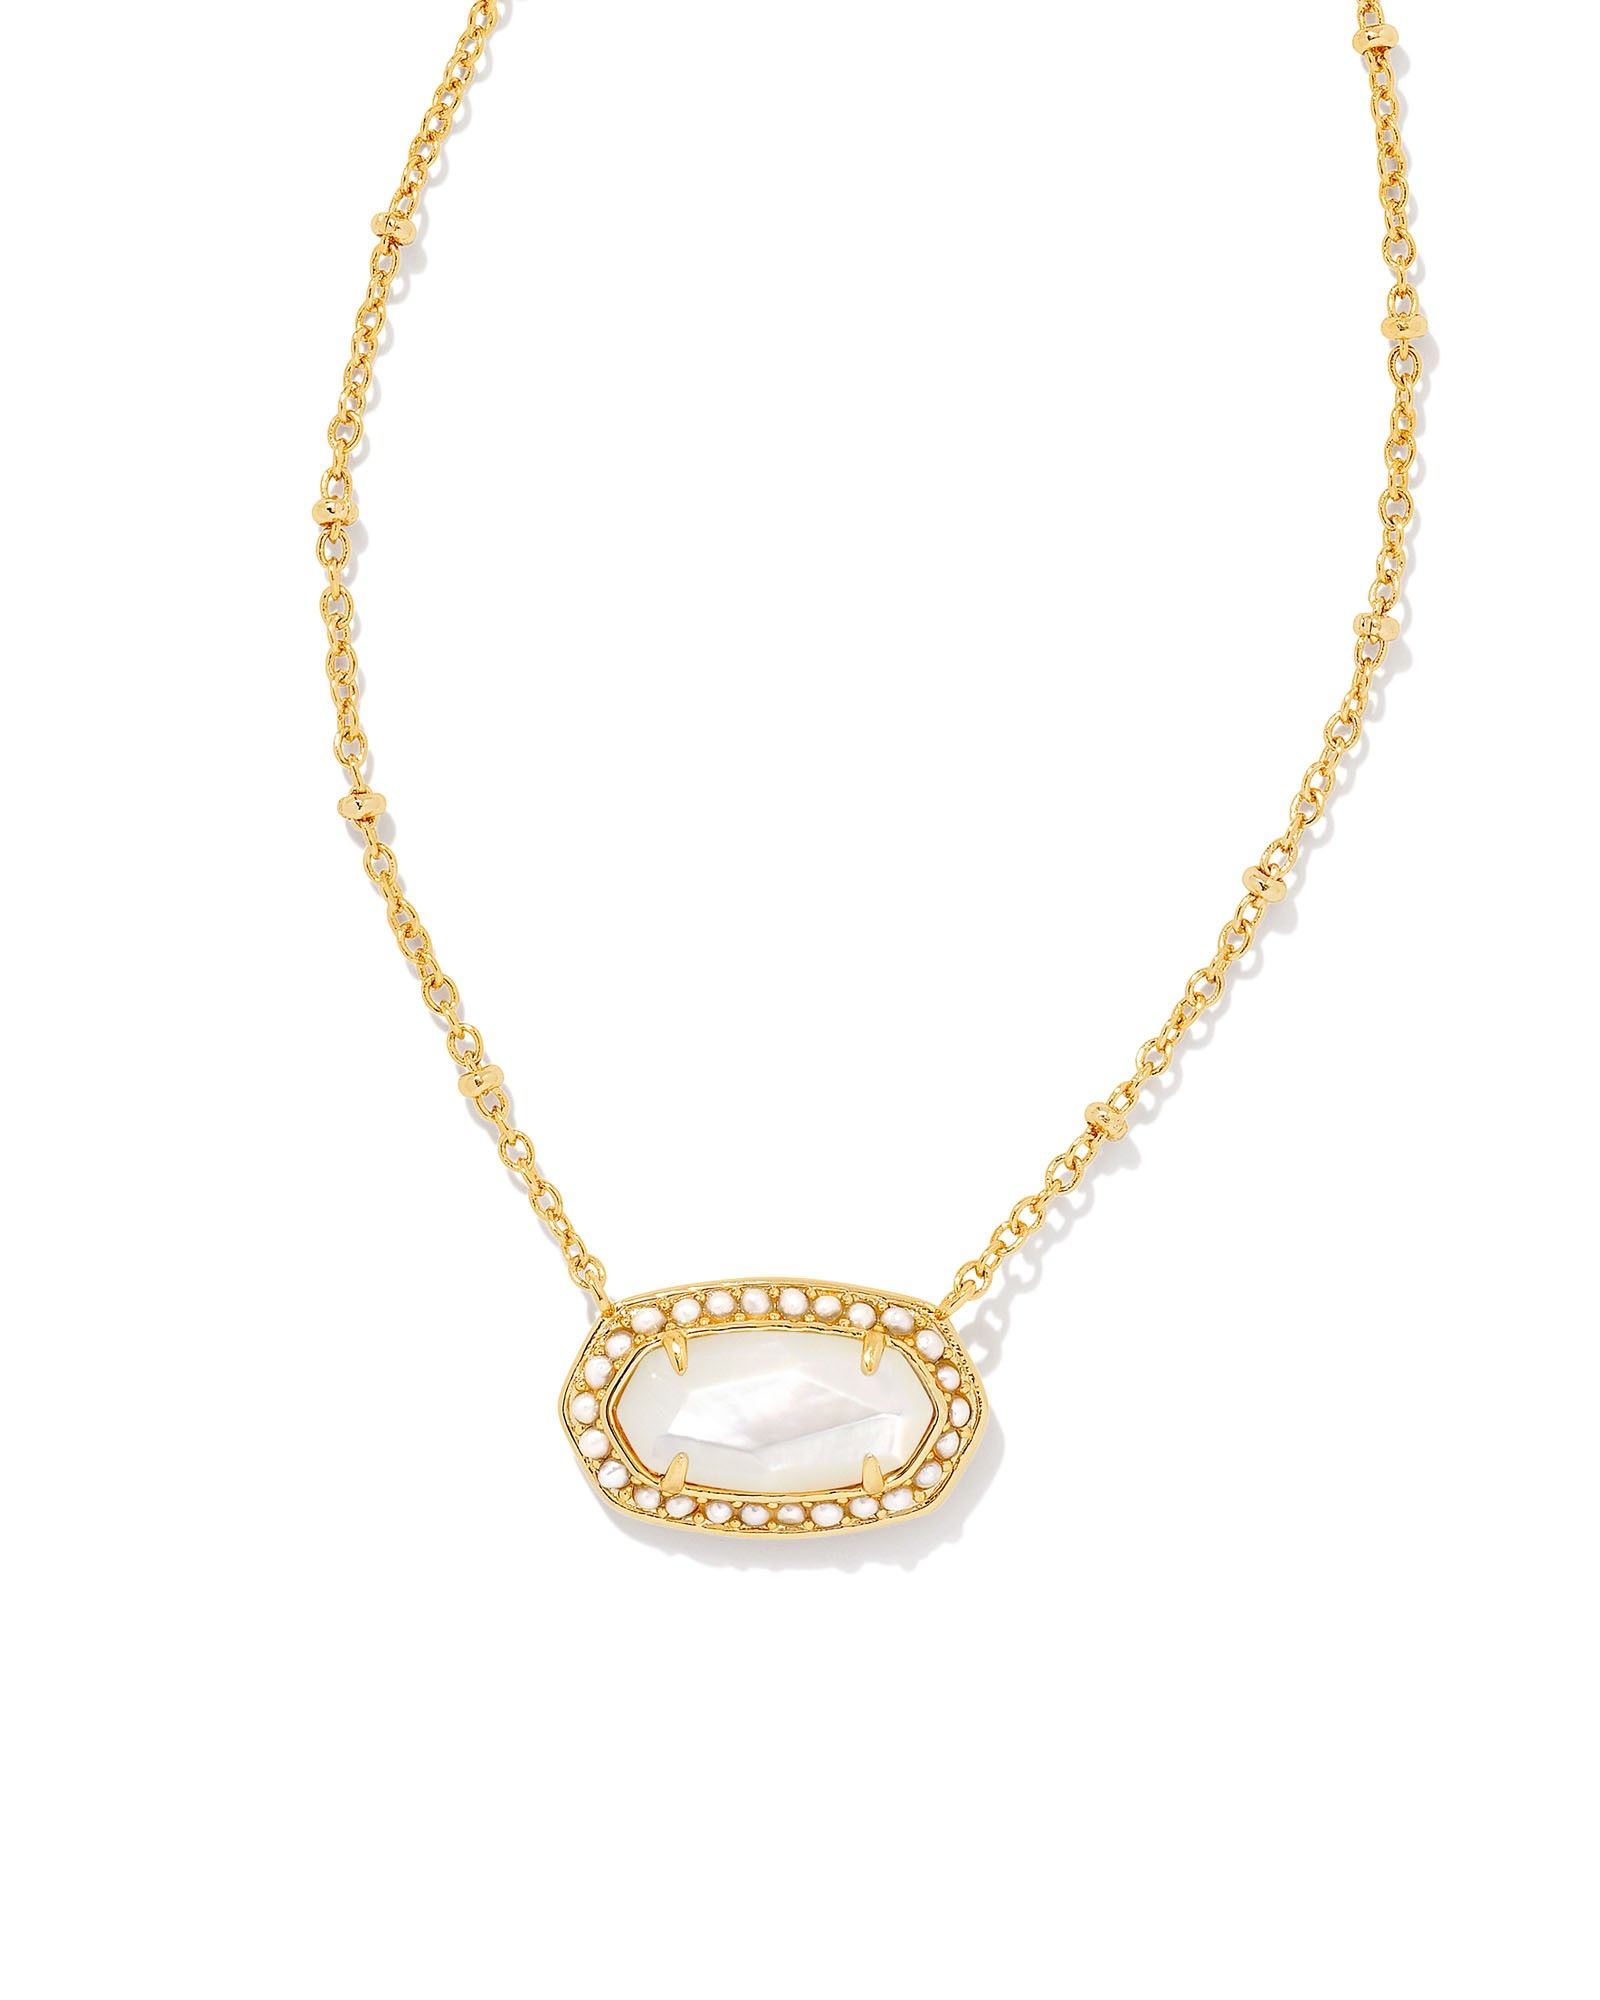 Pearl Beaded Elisa Gold Pendant Necklace in Ivory Mother-of-Pearl | Kendra Scott